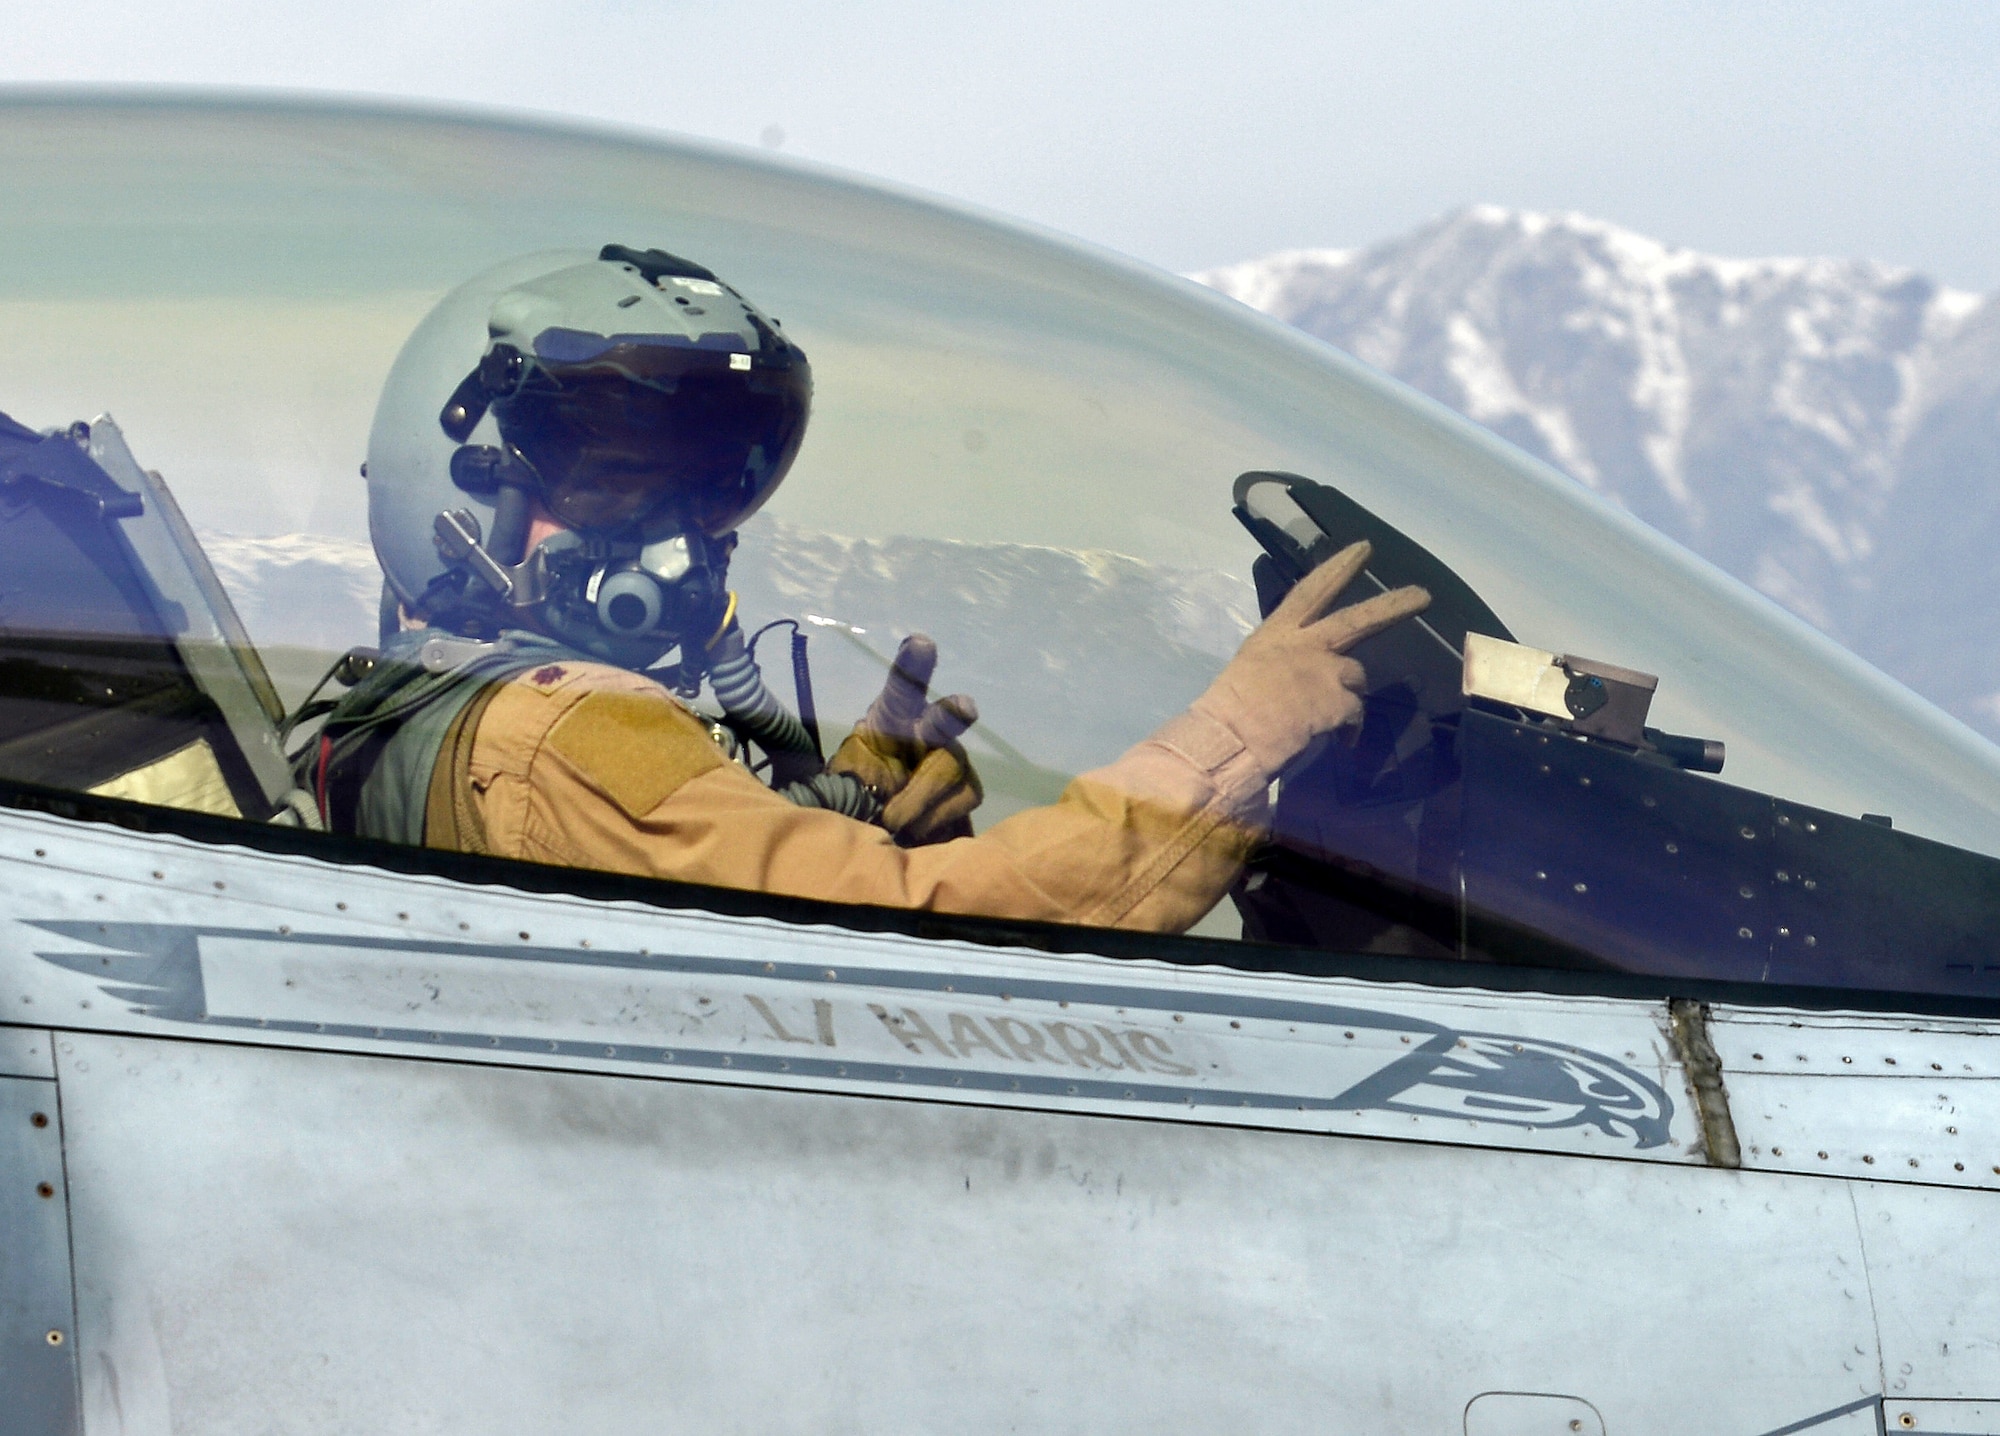 “Mach”, 77th Expeditionary Fighter Squadron F-16 Fighting Falcon fighter pilot, signals from his aircraft prior to taking off Feb. 28, 2018 at Bagram Airfield, Afghanistan.